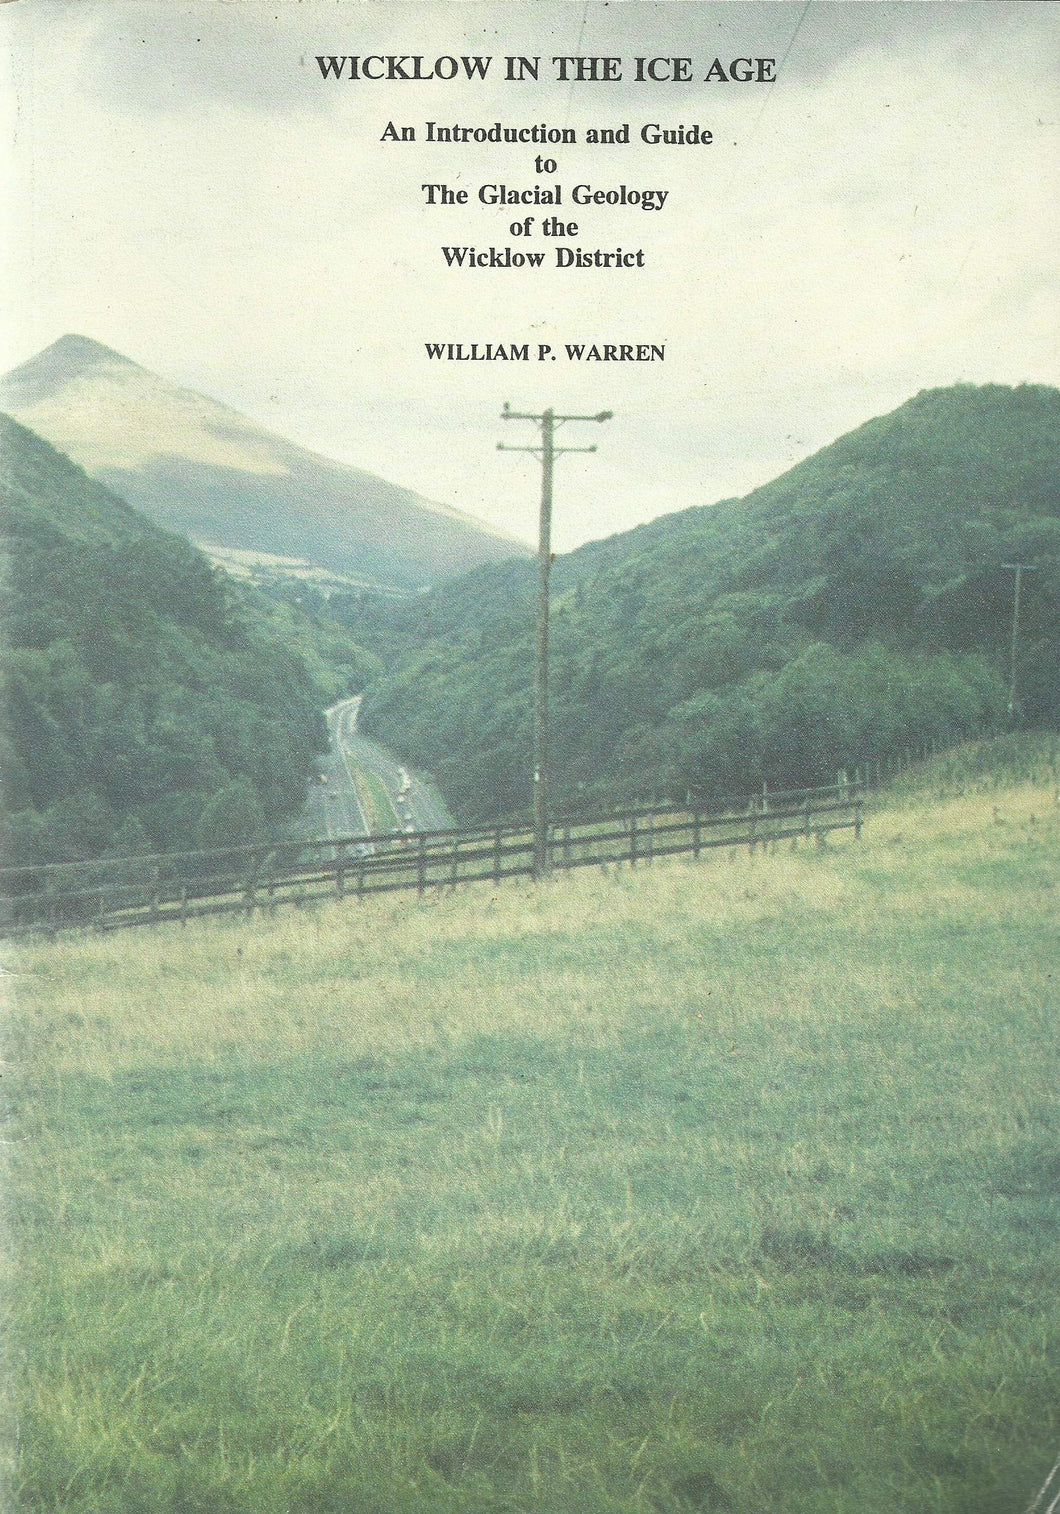 Wicklow in the Ice Age: Introduction and Guide to the Glacial Geology of the Wicklow District